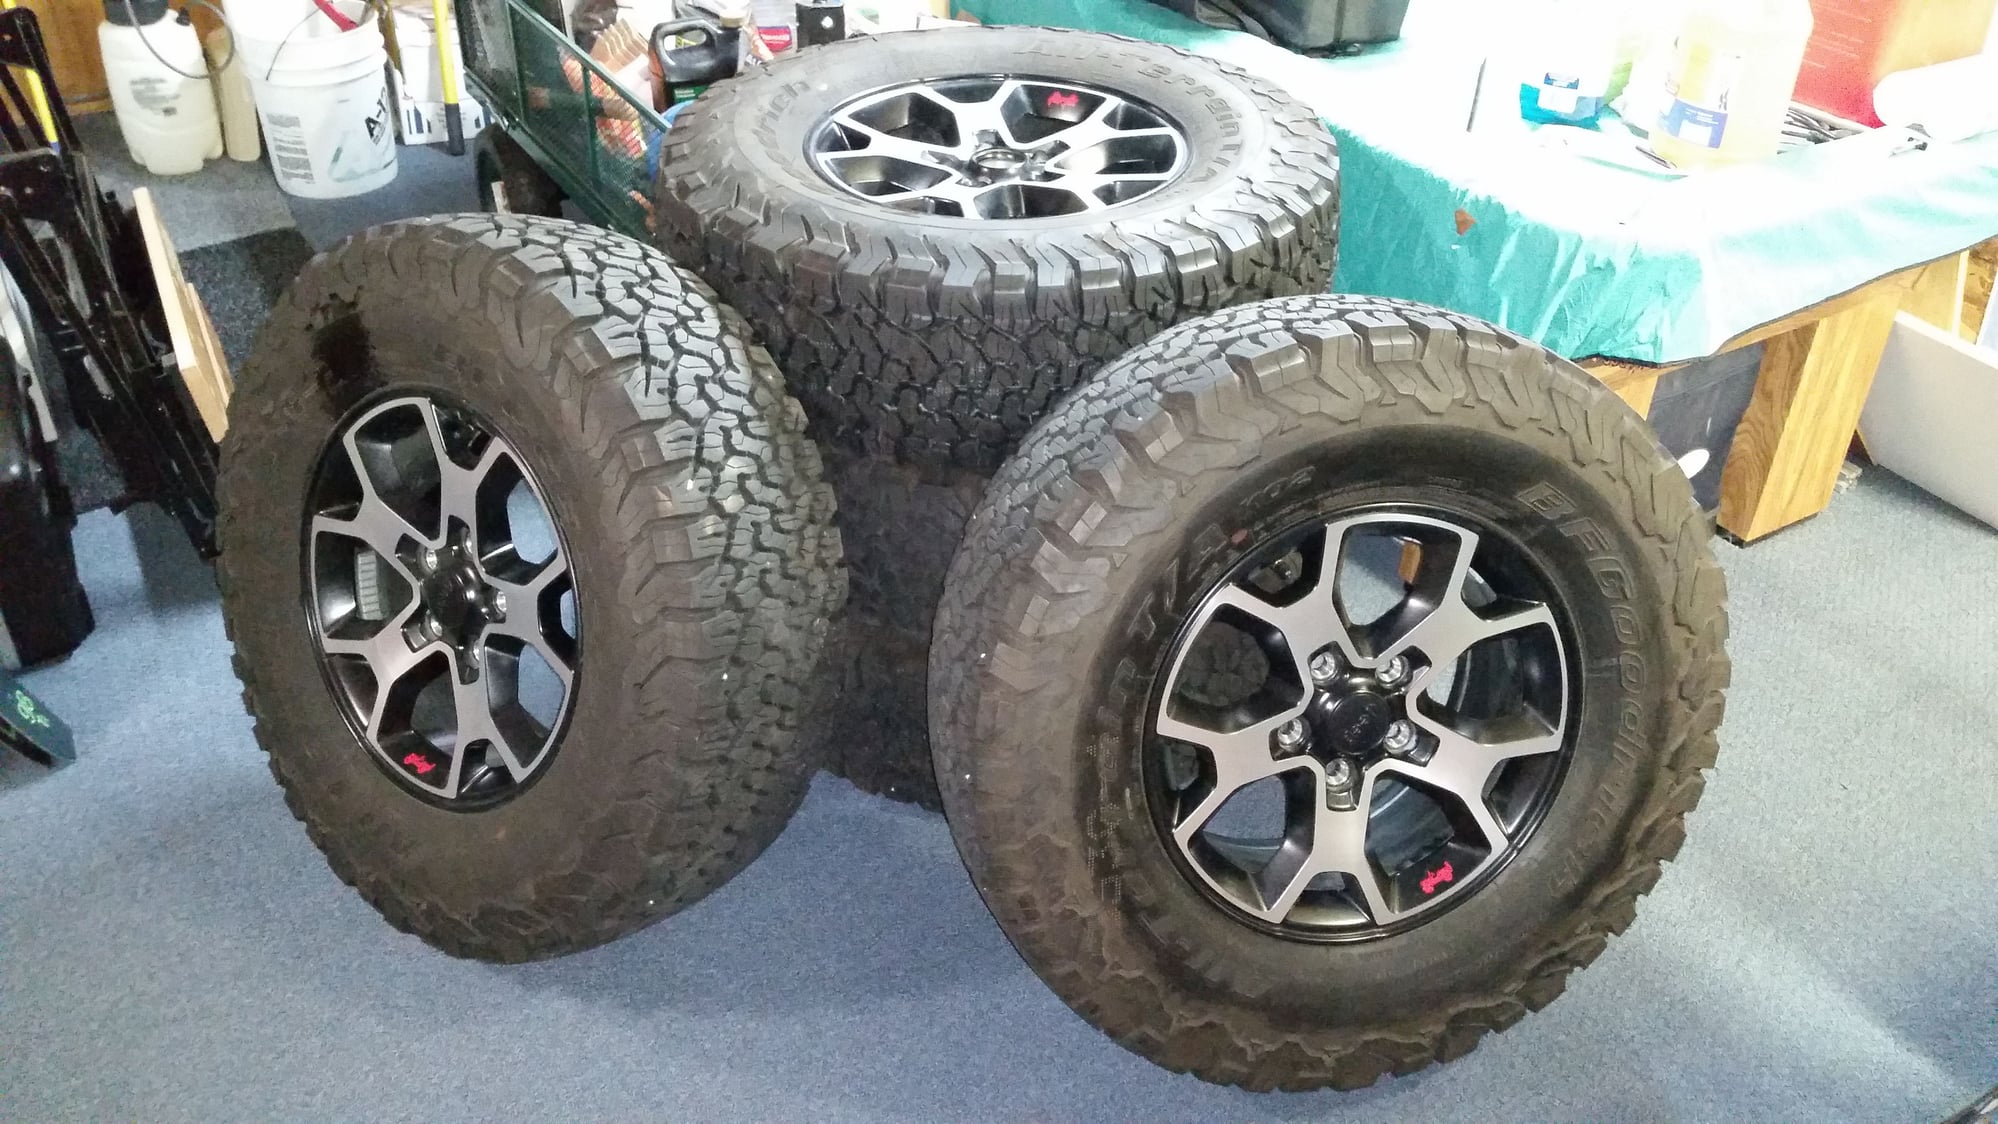 Wheels and Tires/Axles - 2019 Jeep Rubicon Wheels & BFG LT285/70R17 tires - set of 5 - Used - 2019 Jeep Wrangler - Mount Snow, VT 05356, United States